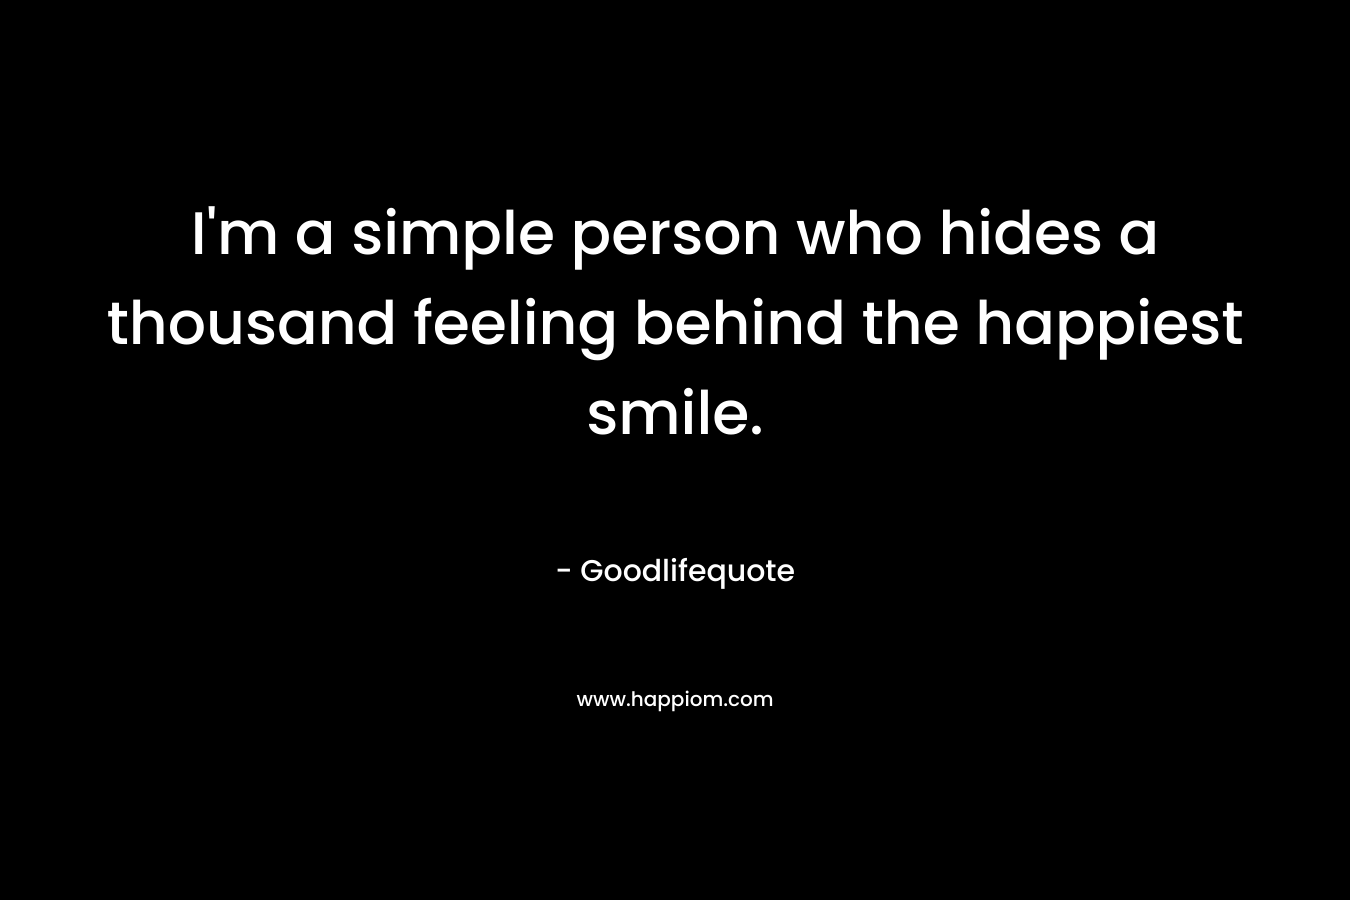 I’m a simple person who hides a thousand feeling behind the happiest smile. – Goodlifequote